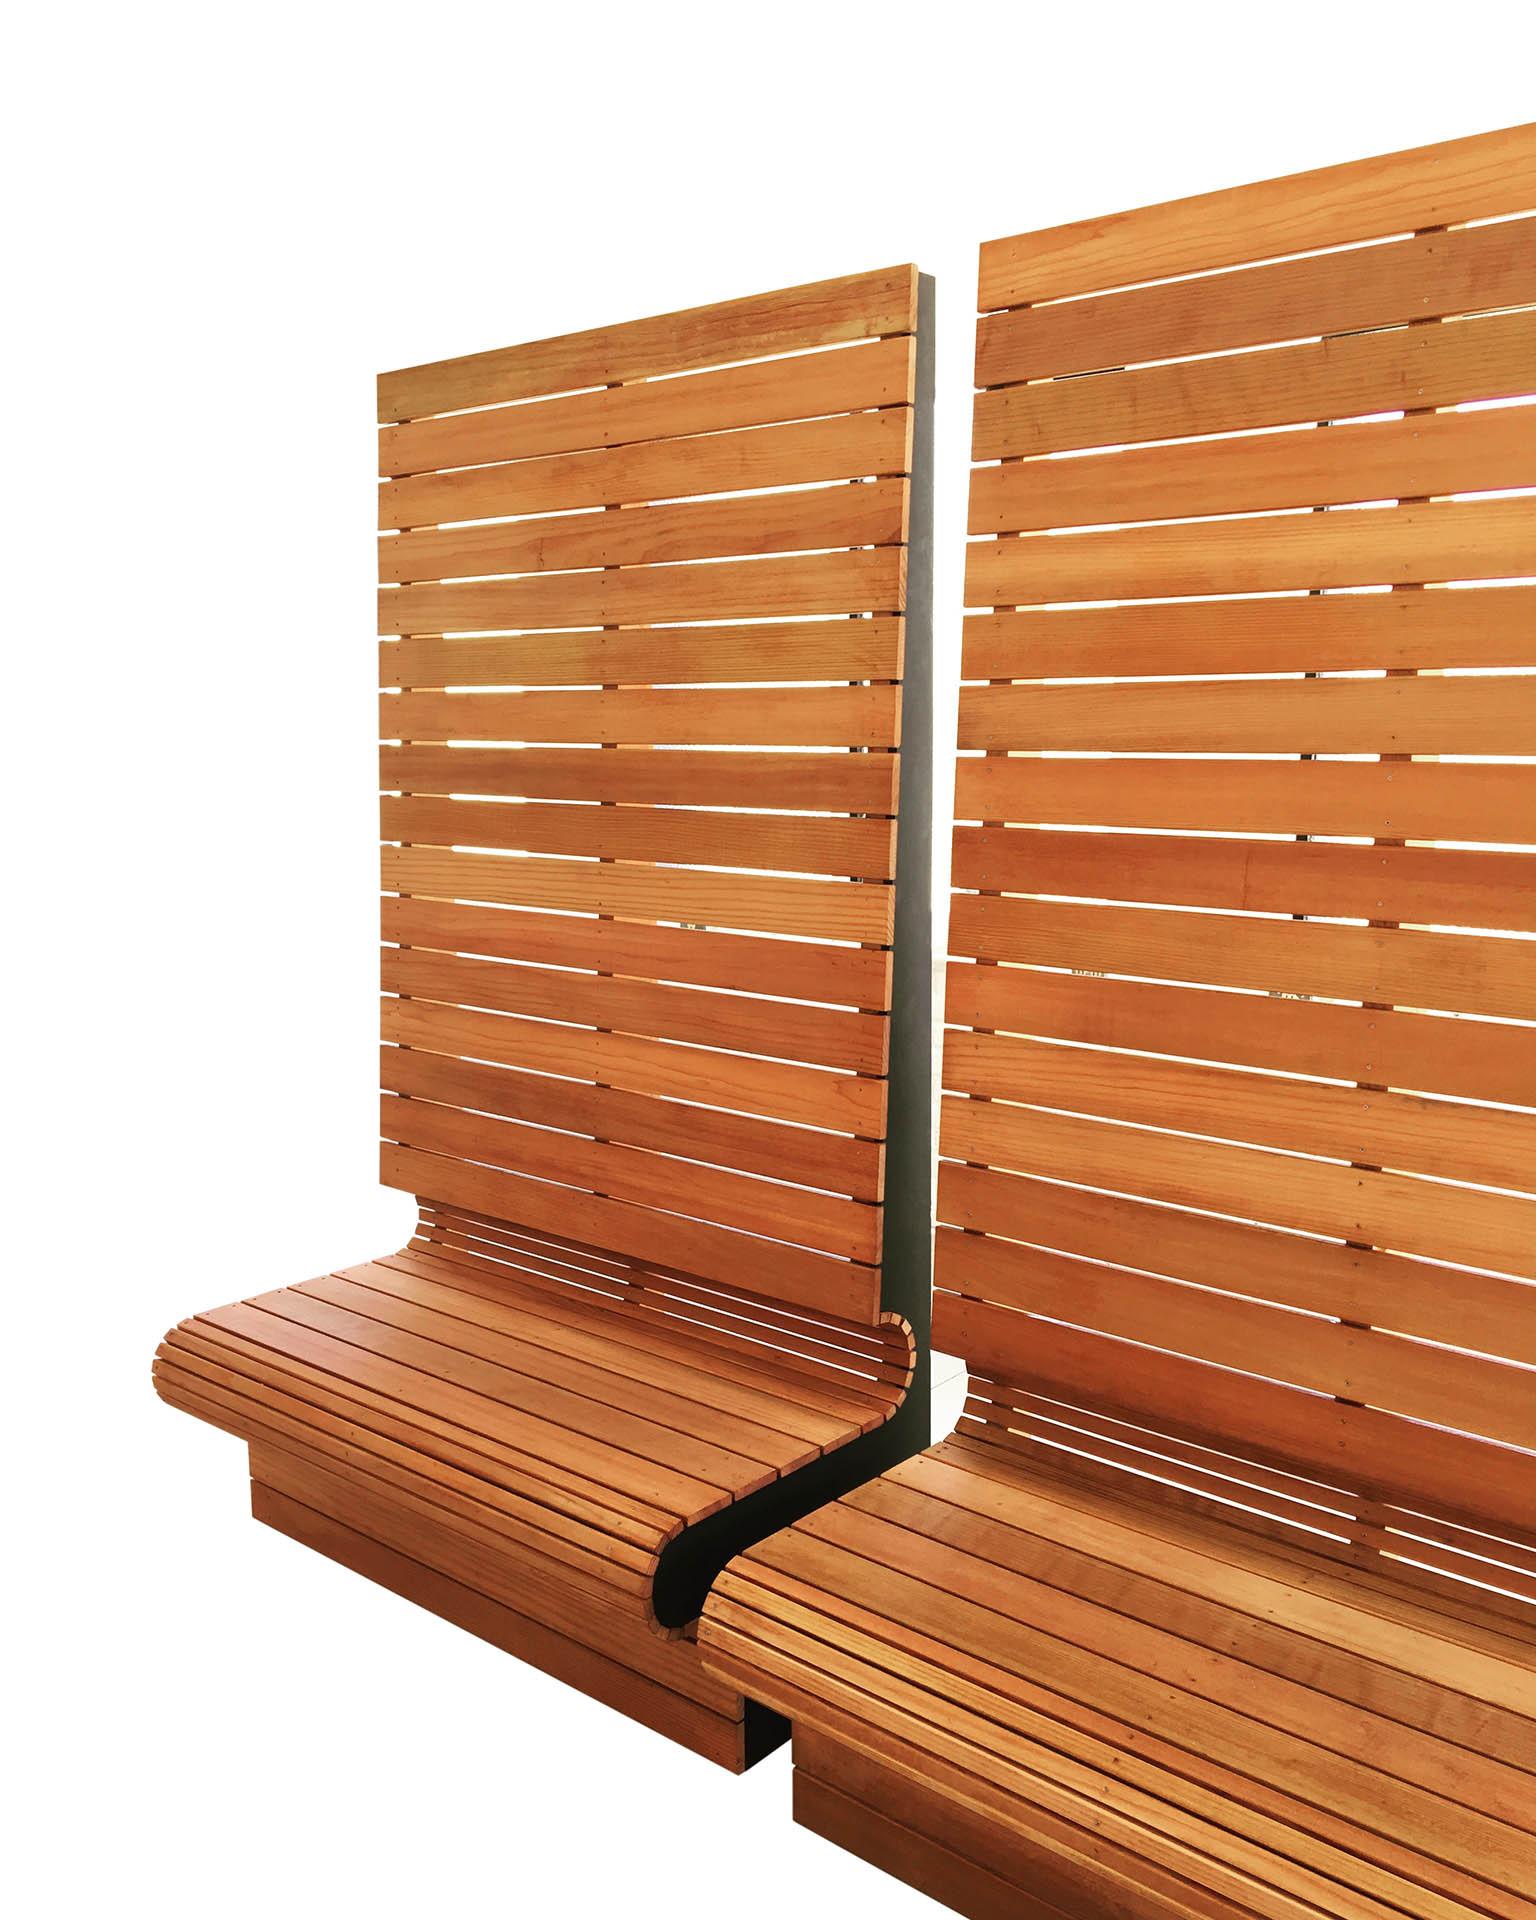 Redwood slats undulate from bench to fence to create a simple lattice of privacy and relaxation. Sold in four foot wide sections. Multiple sections can be bolted together to create a single long linear banquette for outdoor dining or resting.